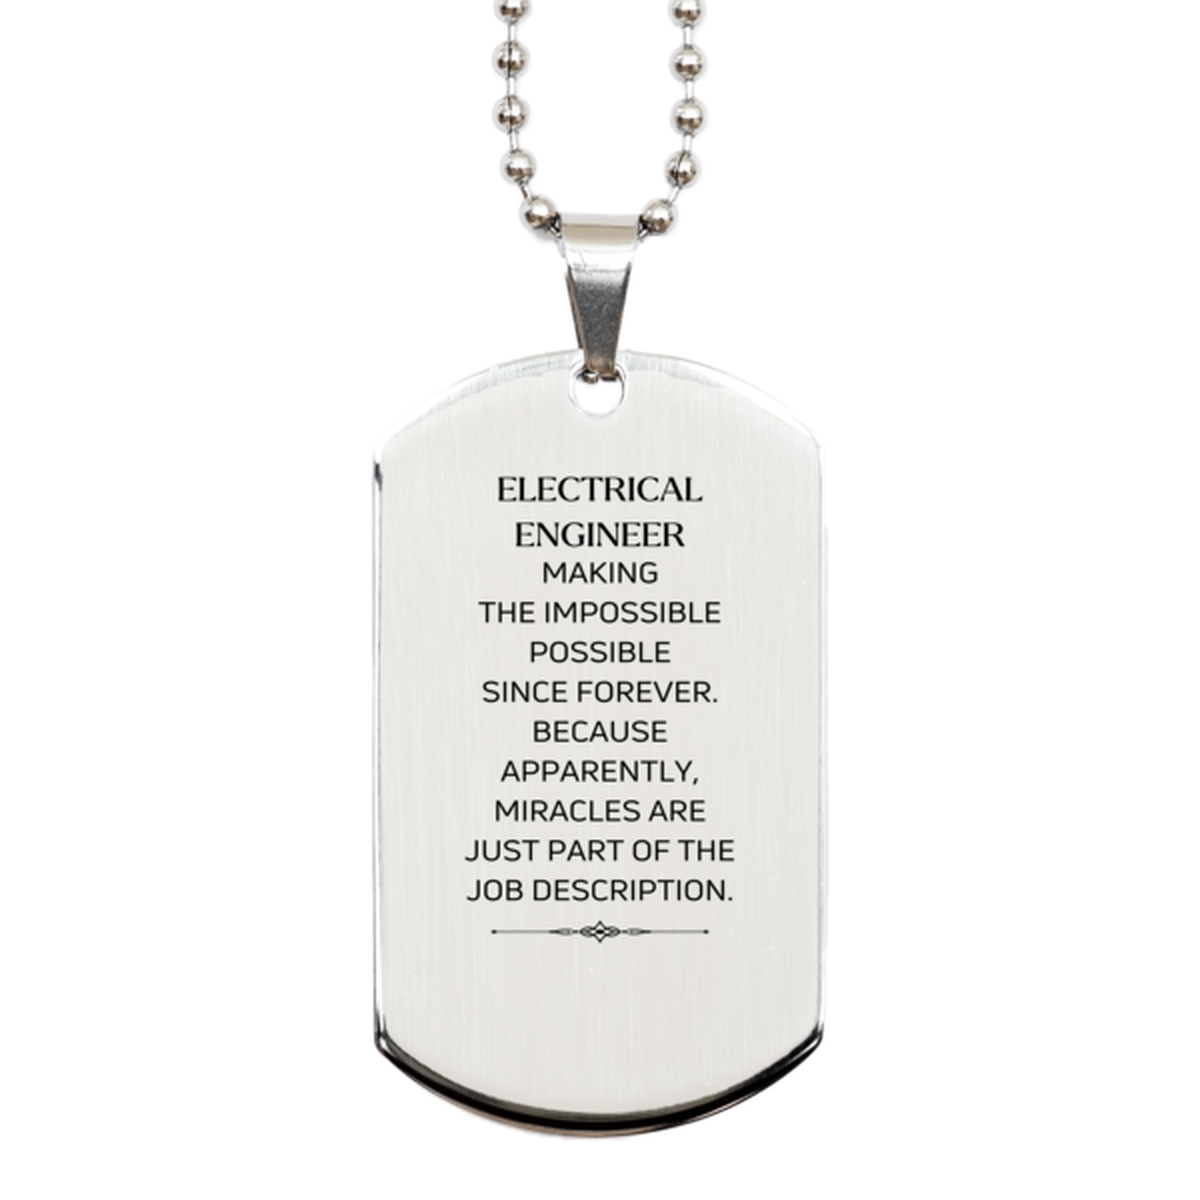 Funny Electrical Engineer Gifts, Miracles are just part of the job description, Inspirational Birthday Silver Dog Tag For Electrical Engineer, Men, Women, Coworkers, Friends, Boss